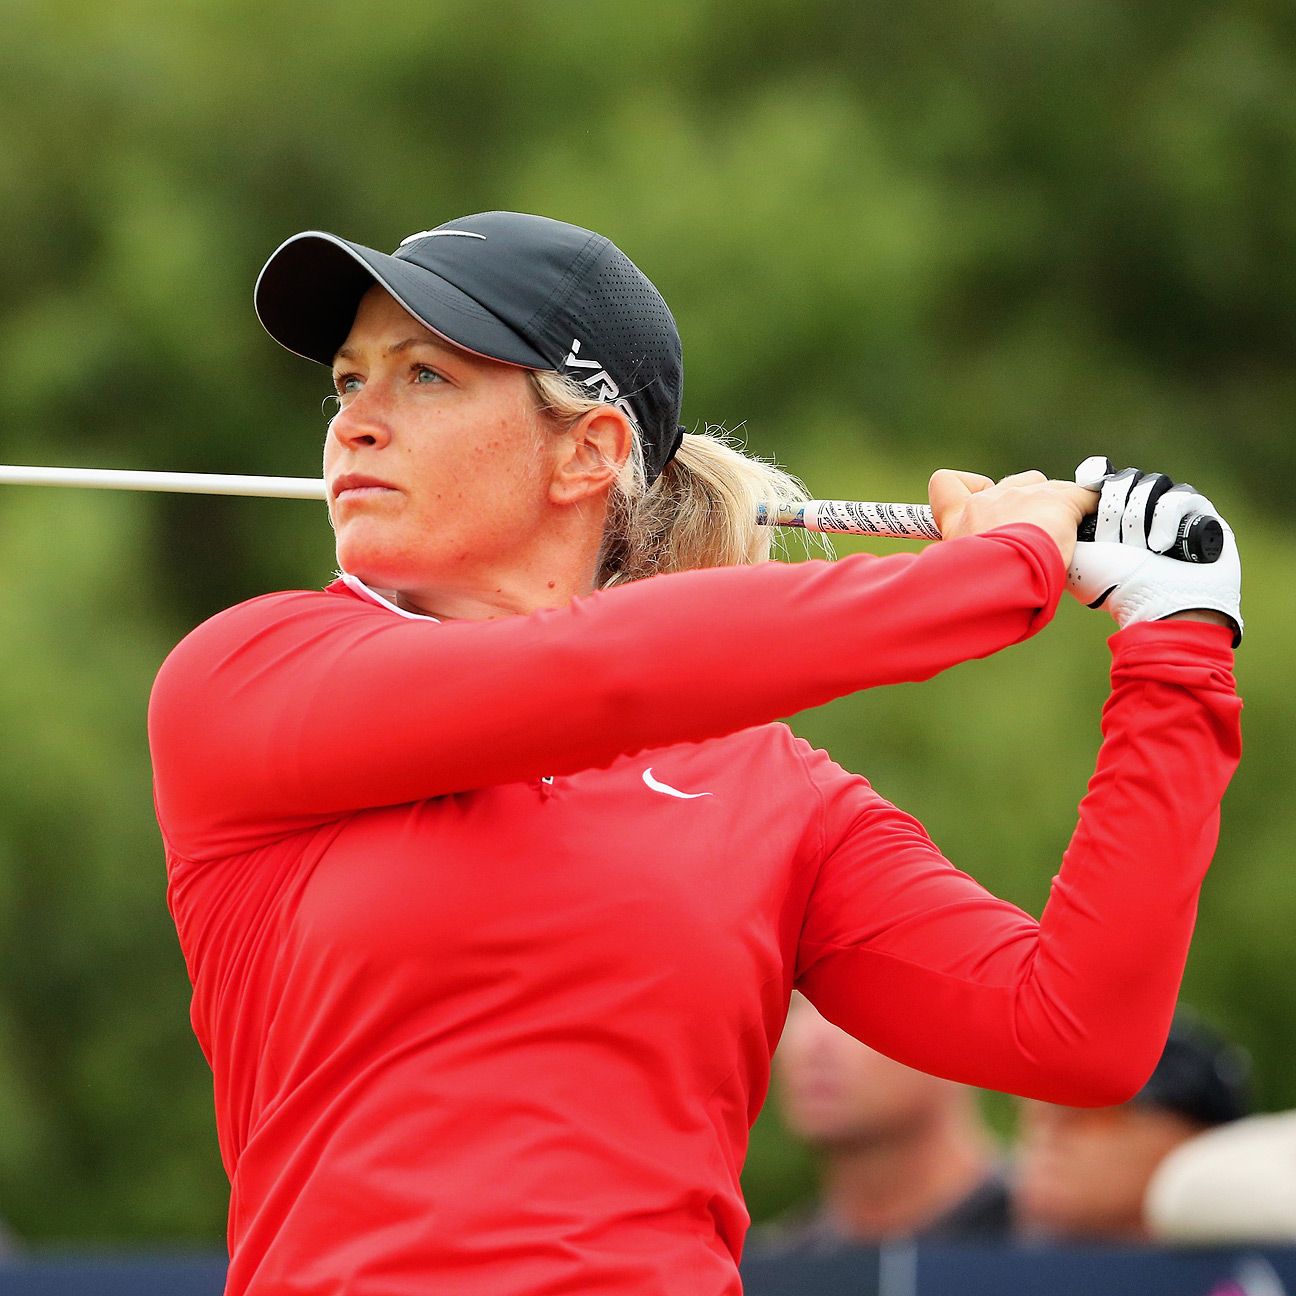 World No. 2 Suzann Pettersen led all four rounds to 